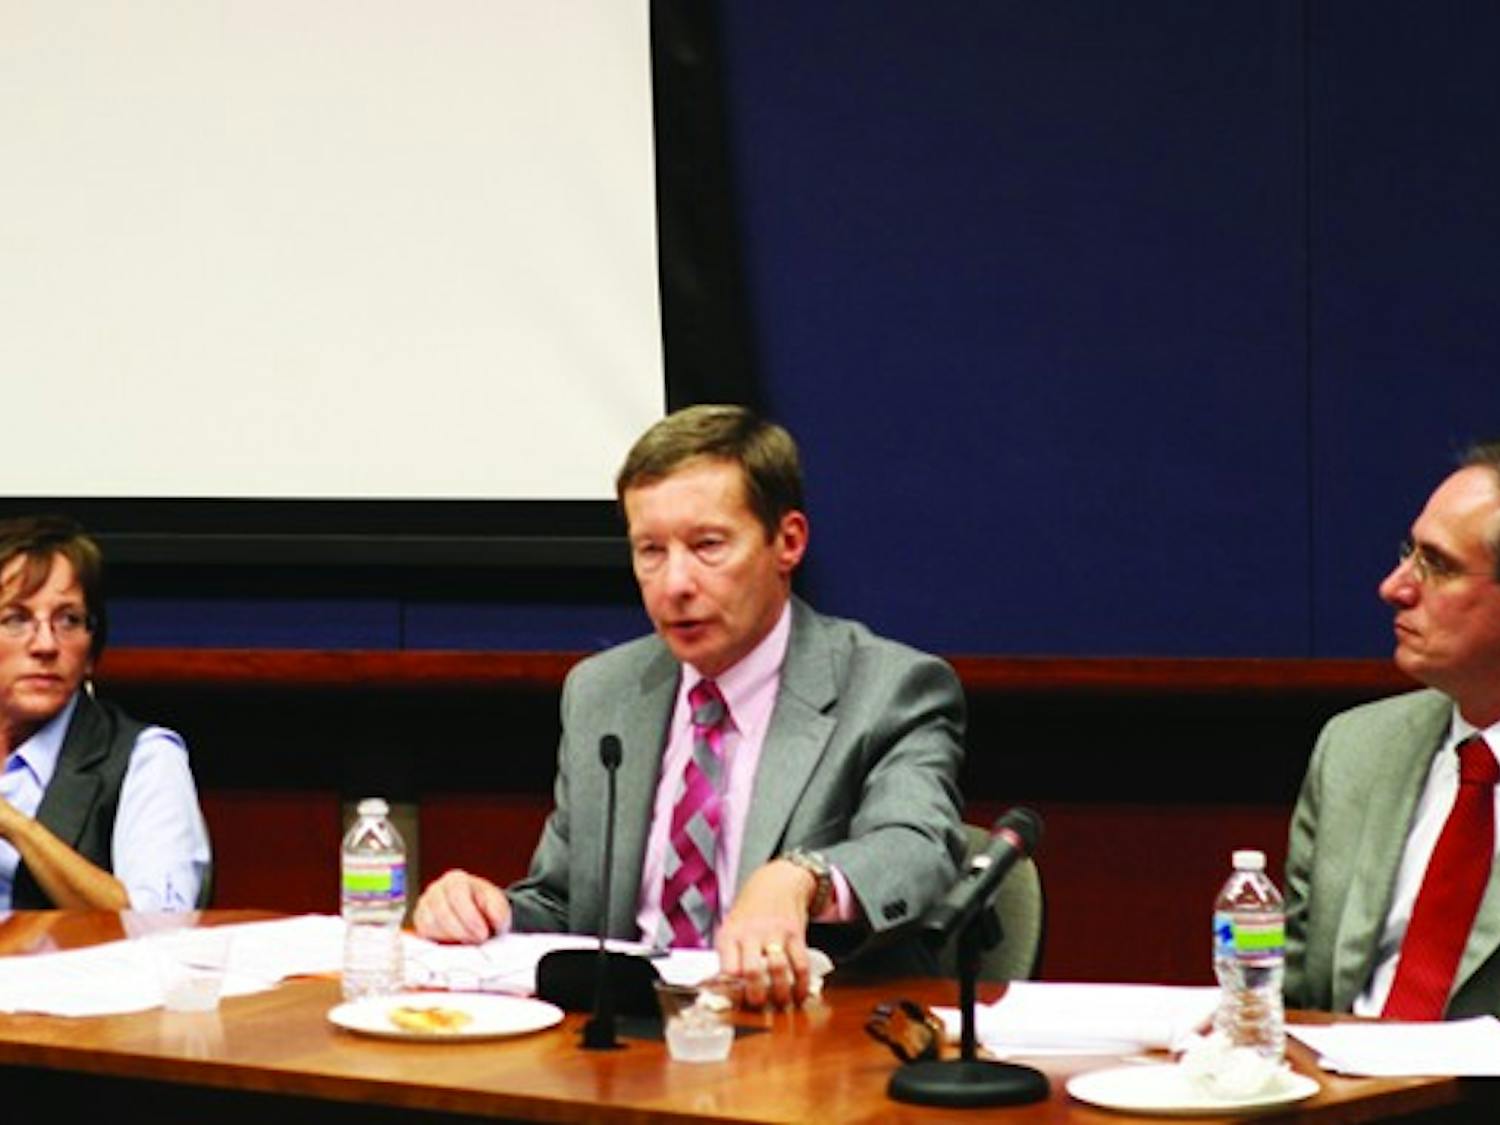 Panelists discussed the legality of the War on Terror post-9/11.